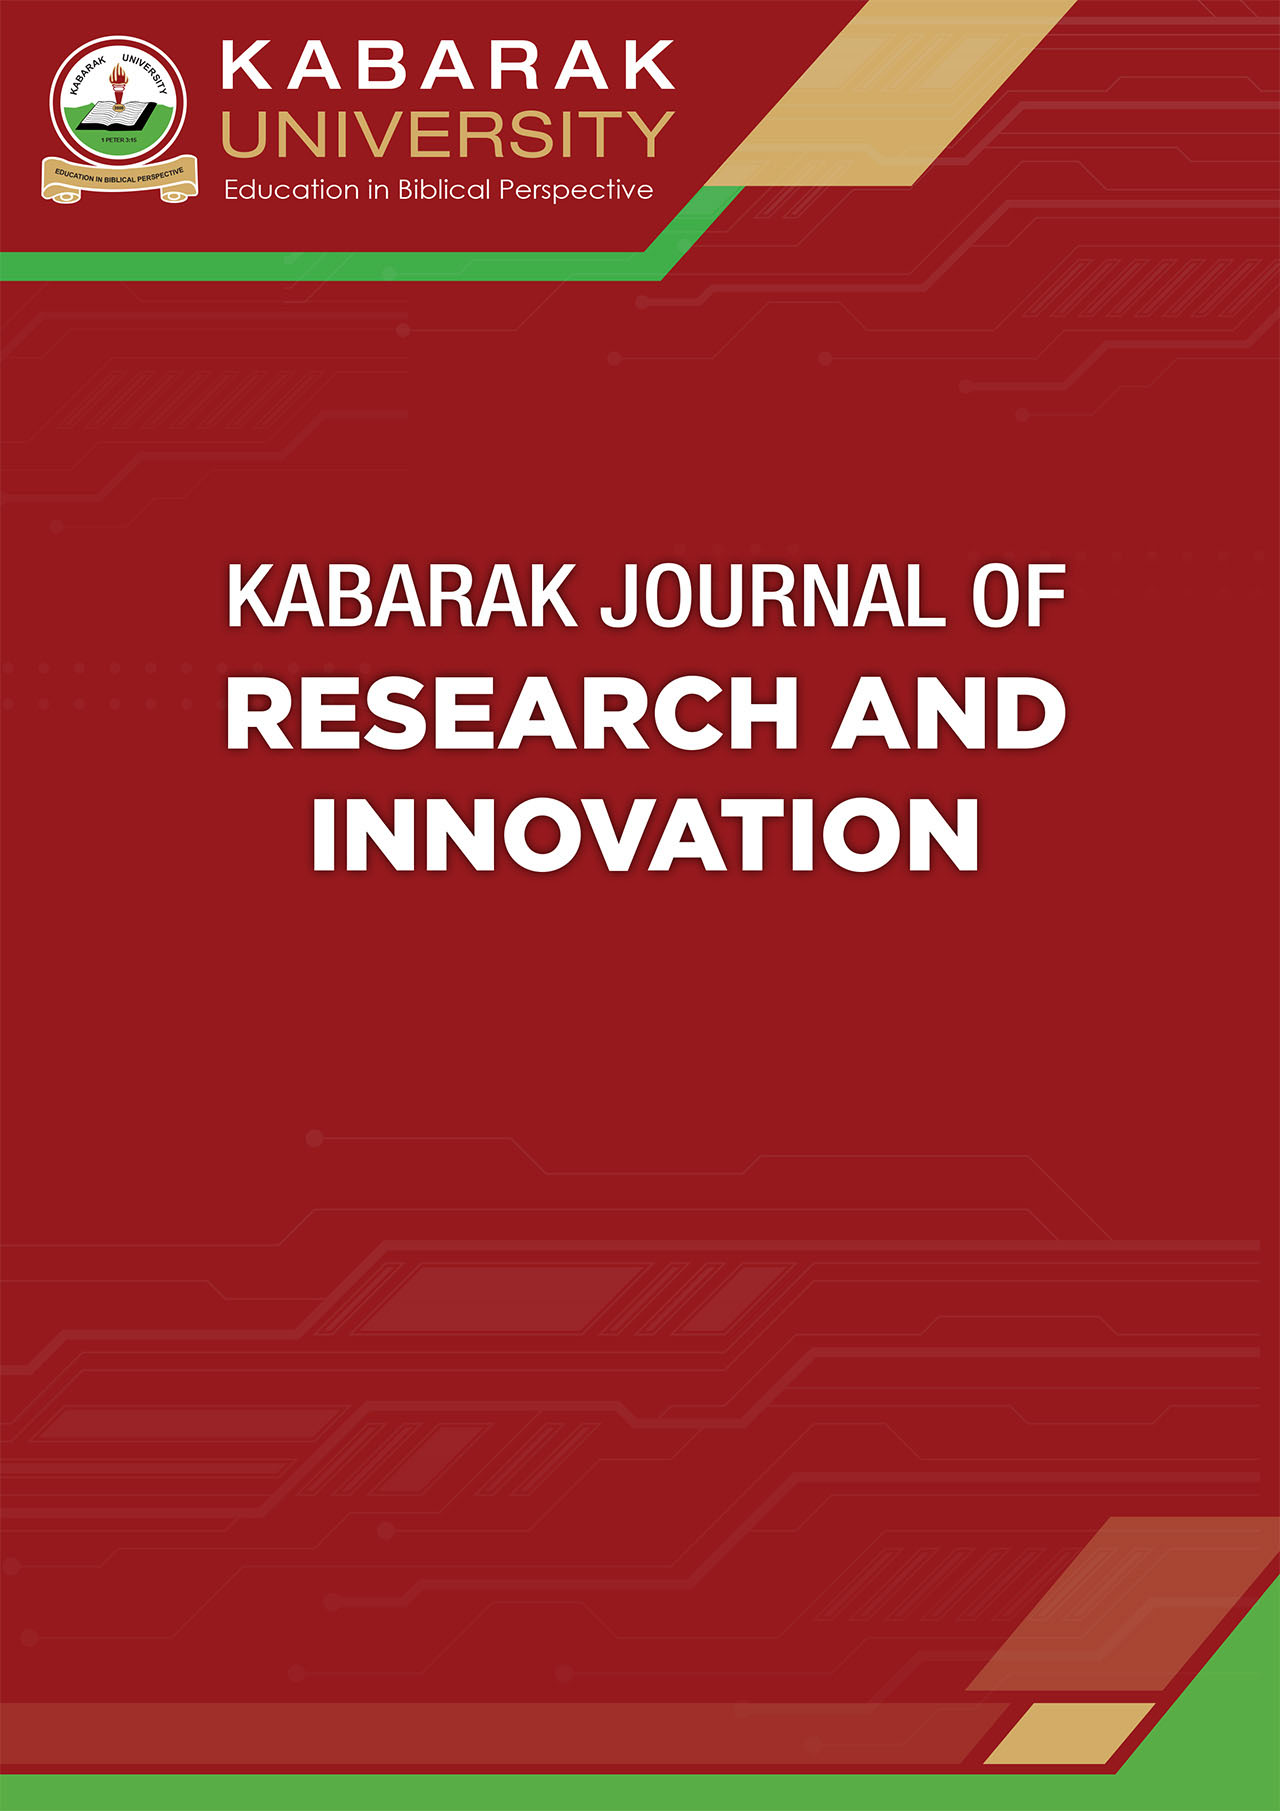 					View Vol. 3 No. 1 (2015): Kabarak Journal of Research and Innovation (KJRI) 
				